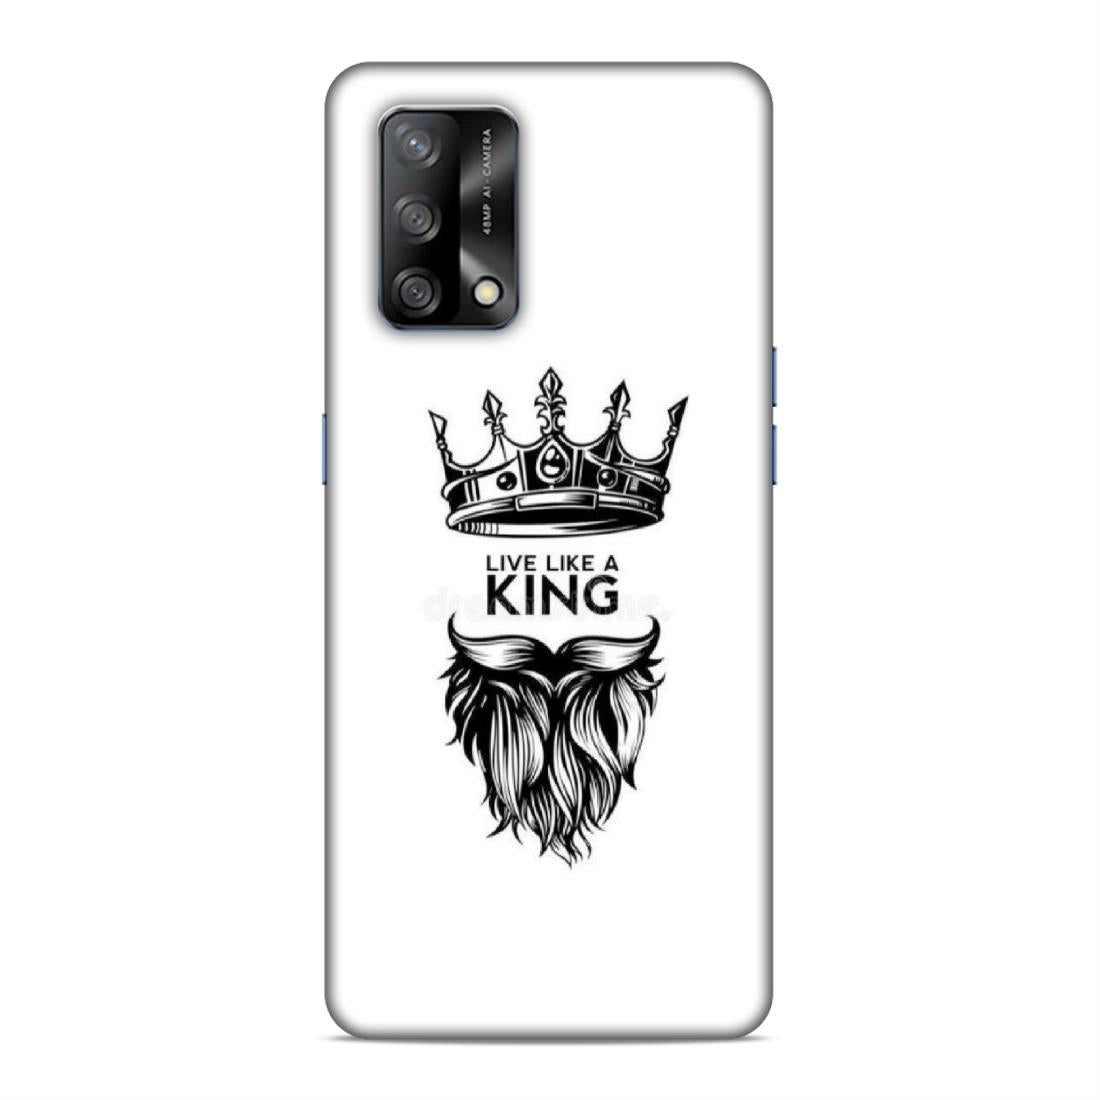 Live Like A King Hard Back Case For Oppo F19 / F19s